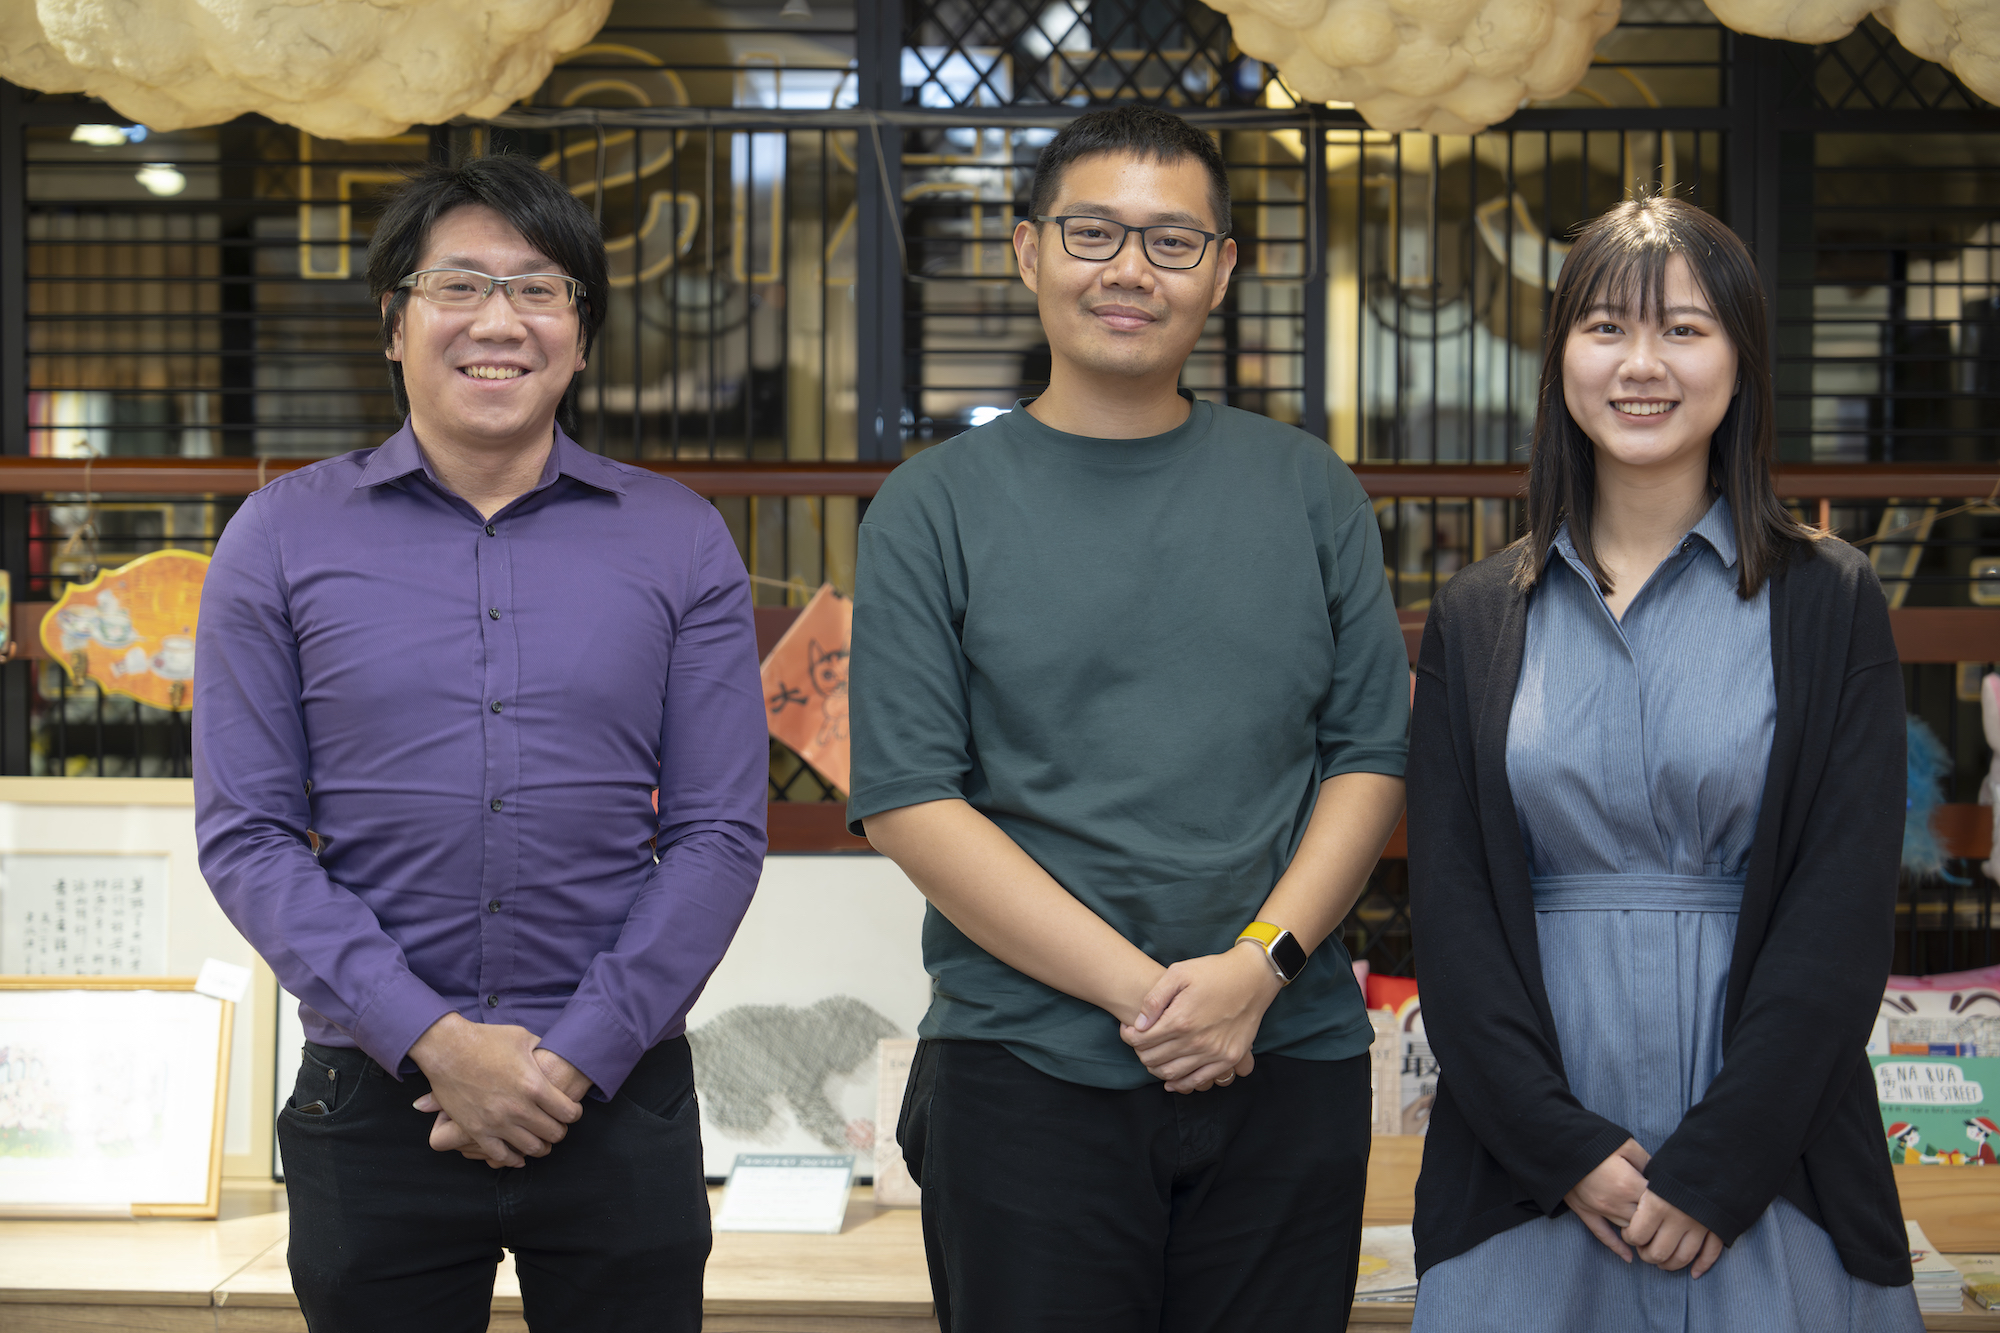 (Left to right) MHAA volunteers Harry Kwah, Matias Lao and Lorna Ng